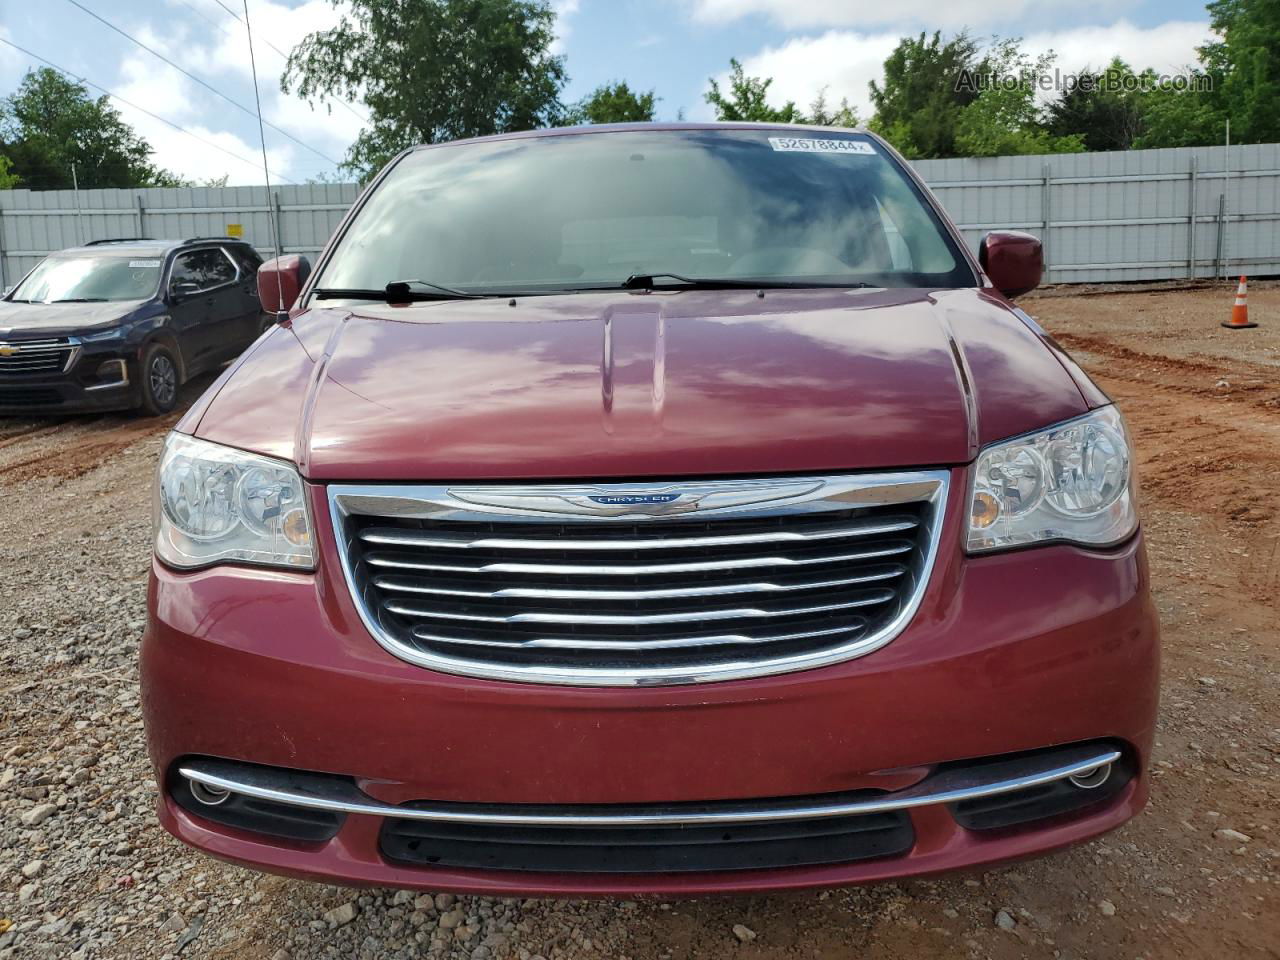 2011 Chrysler Town & Country Touring Maroon vin: 2A4RR5DG5BR611405